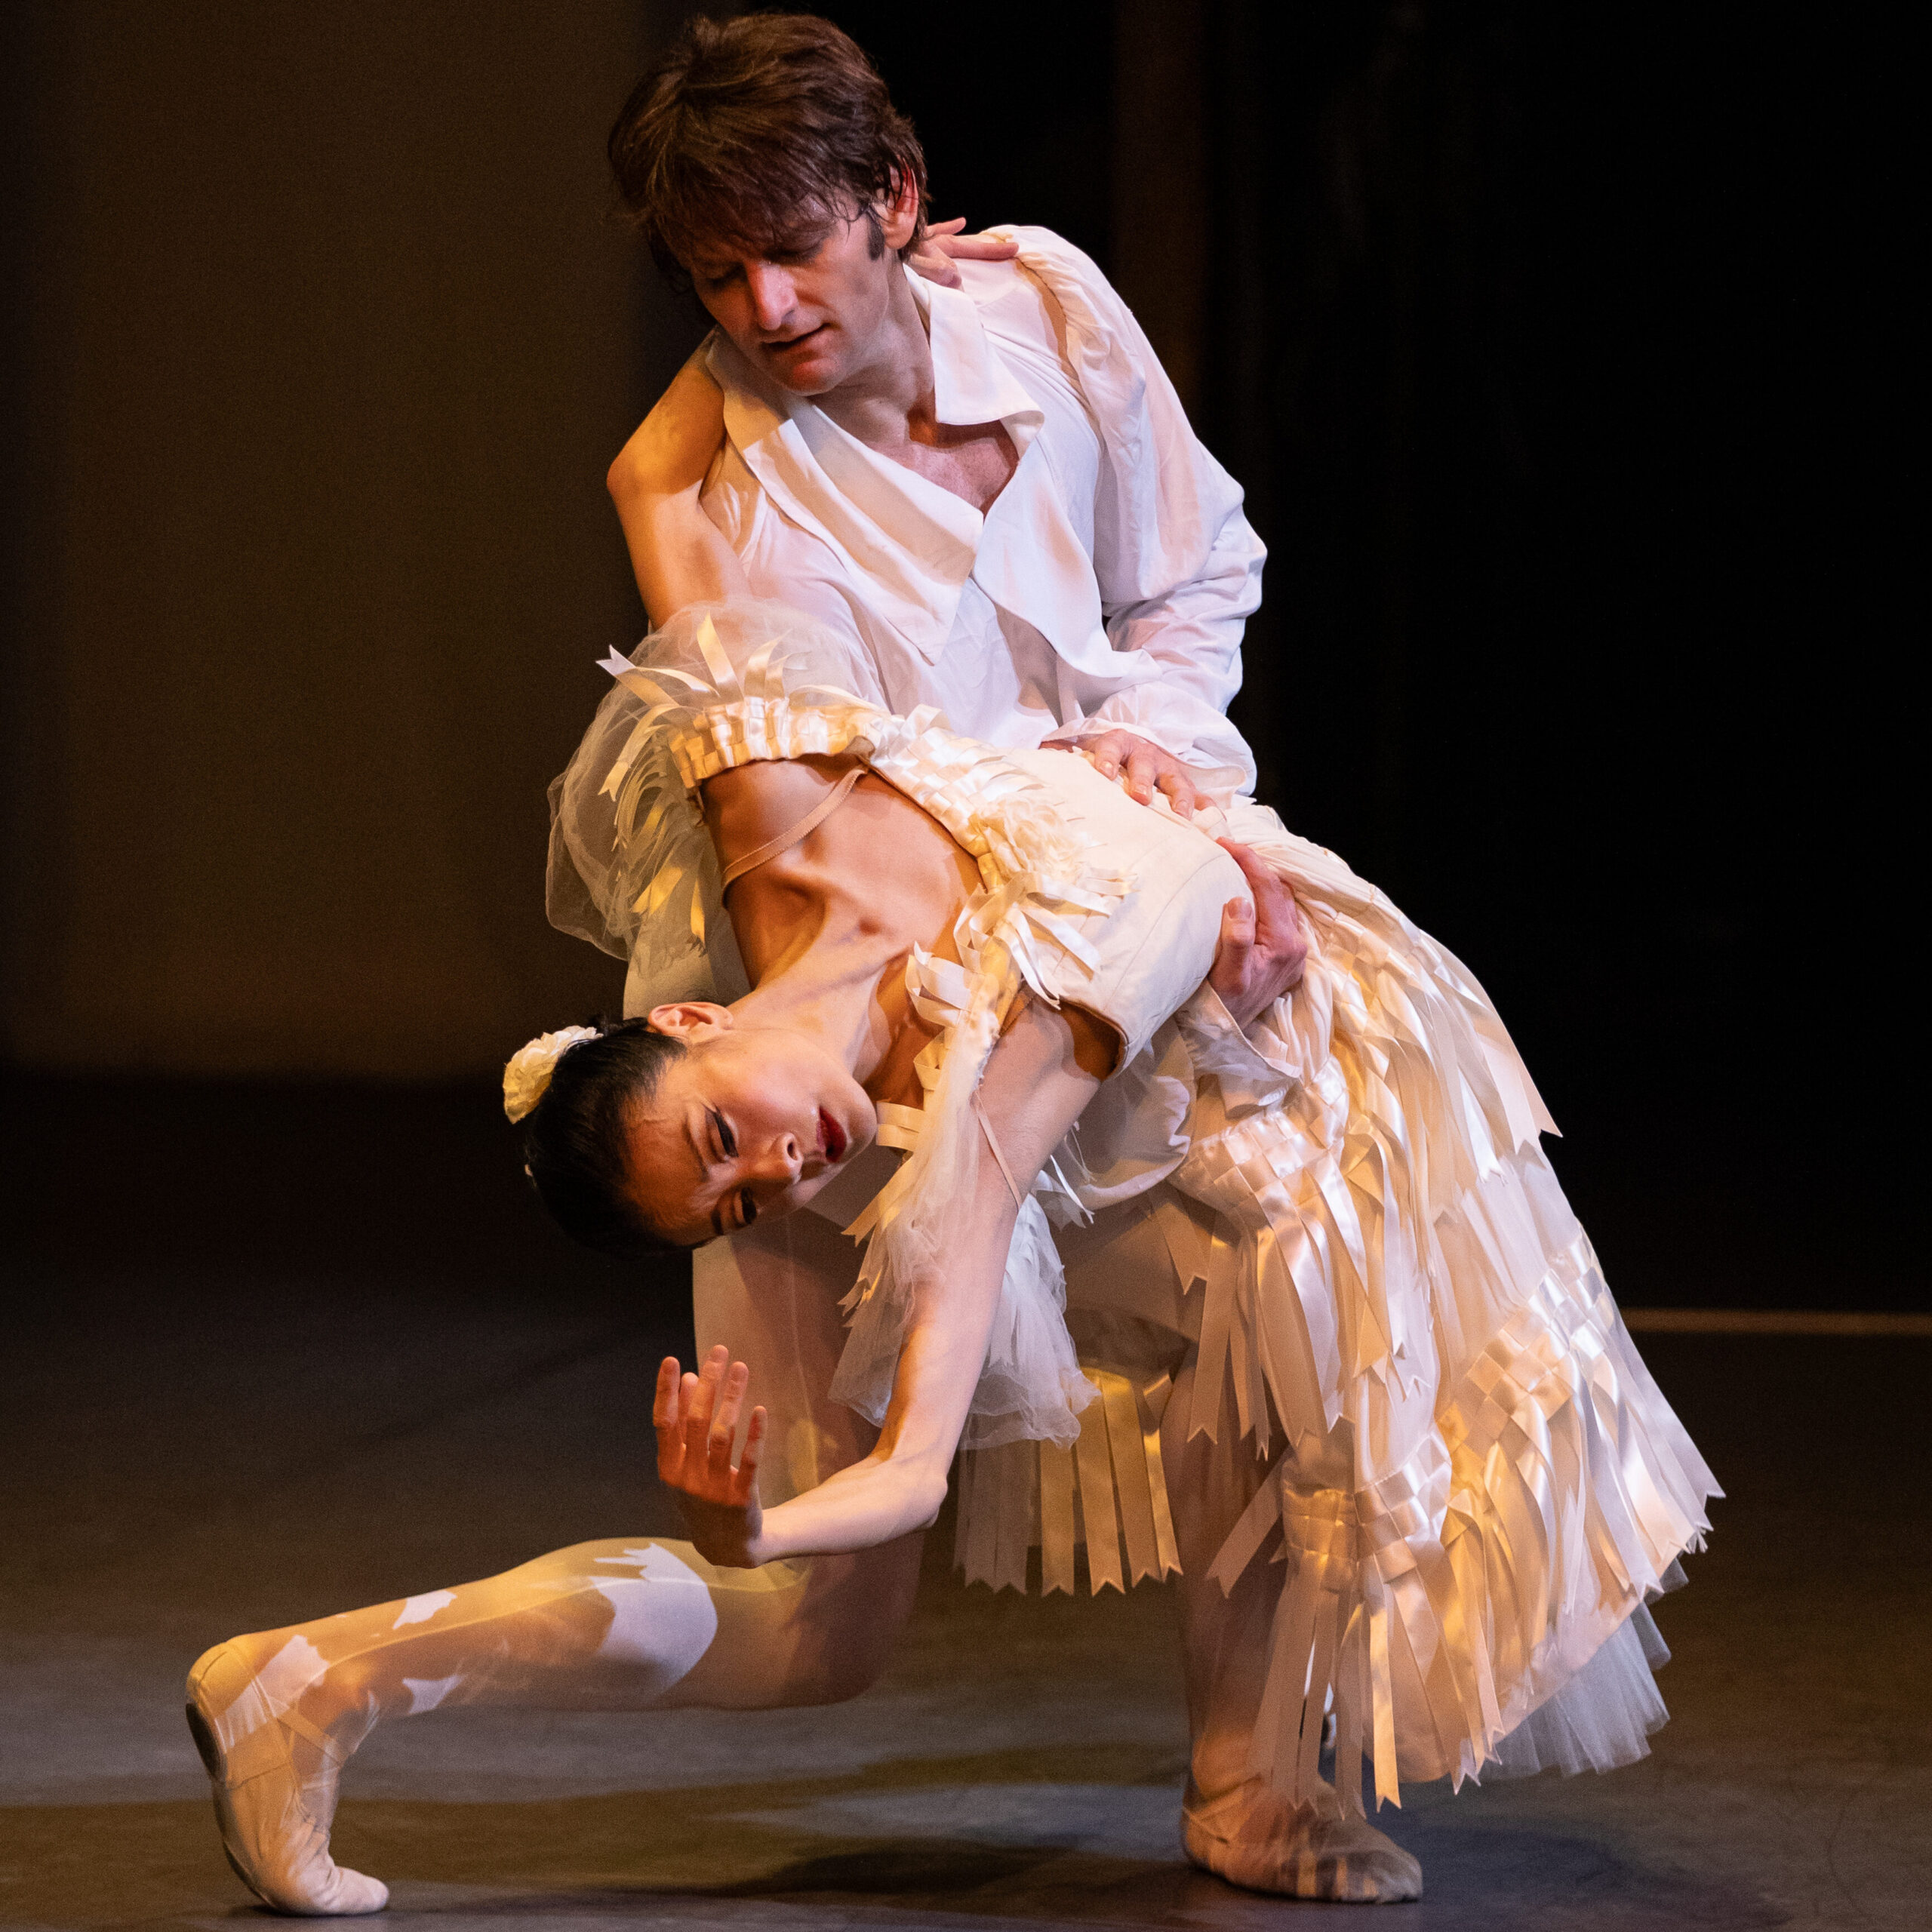 a male dancer dipping a female dancer back, both wearing white